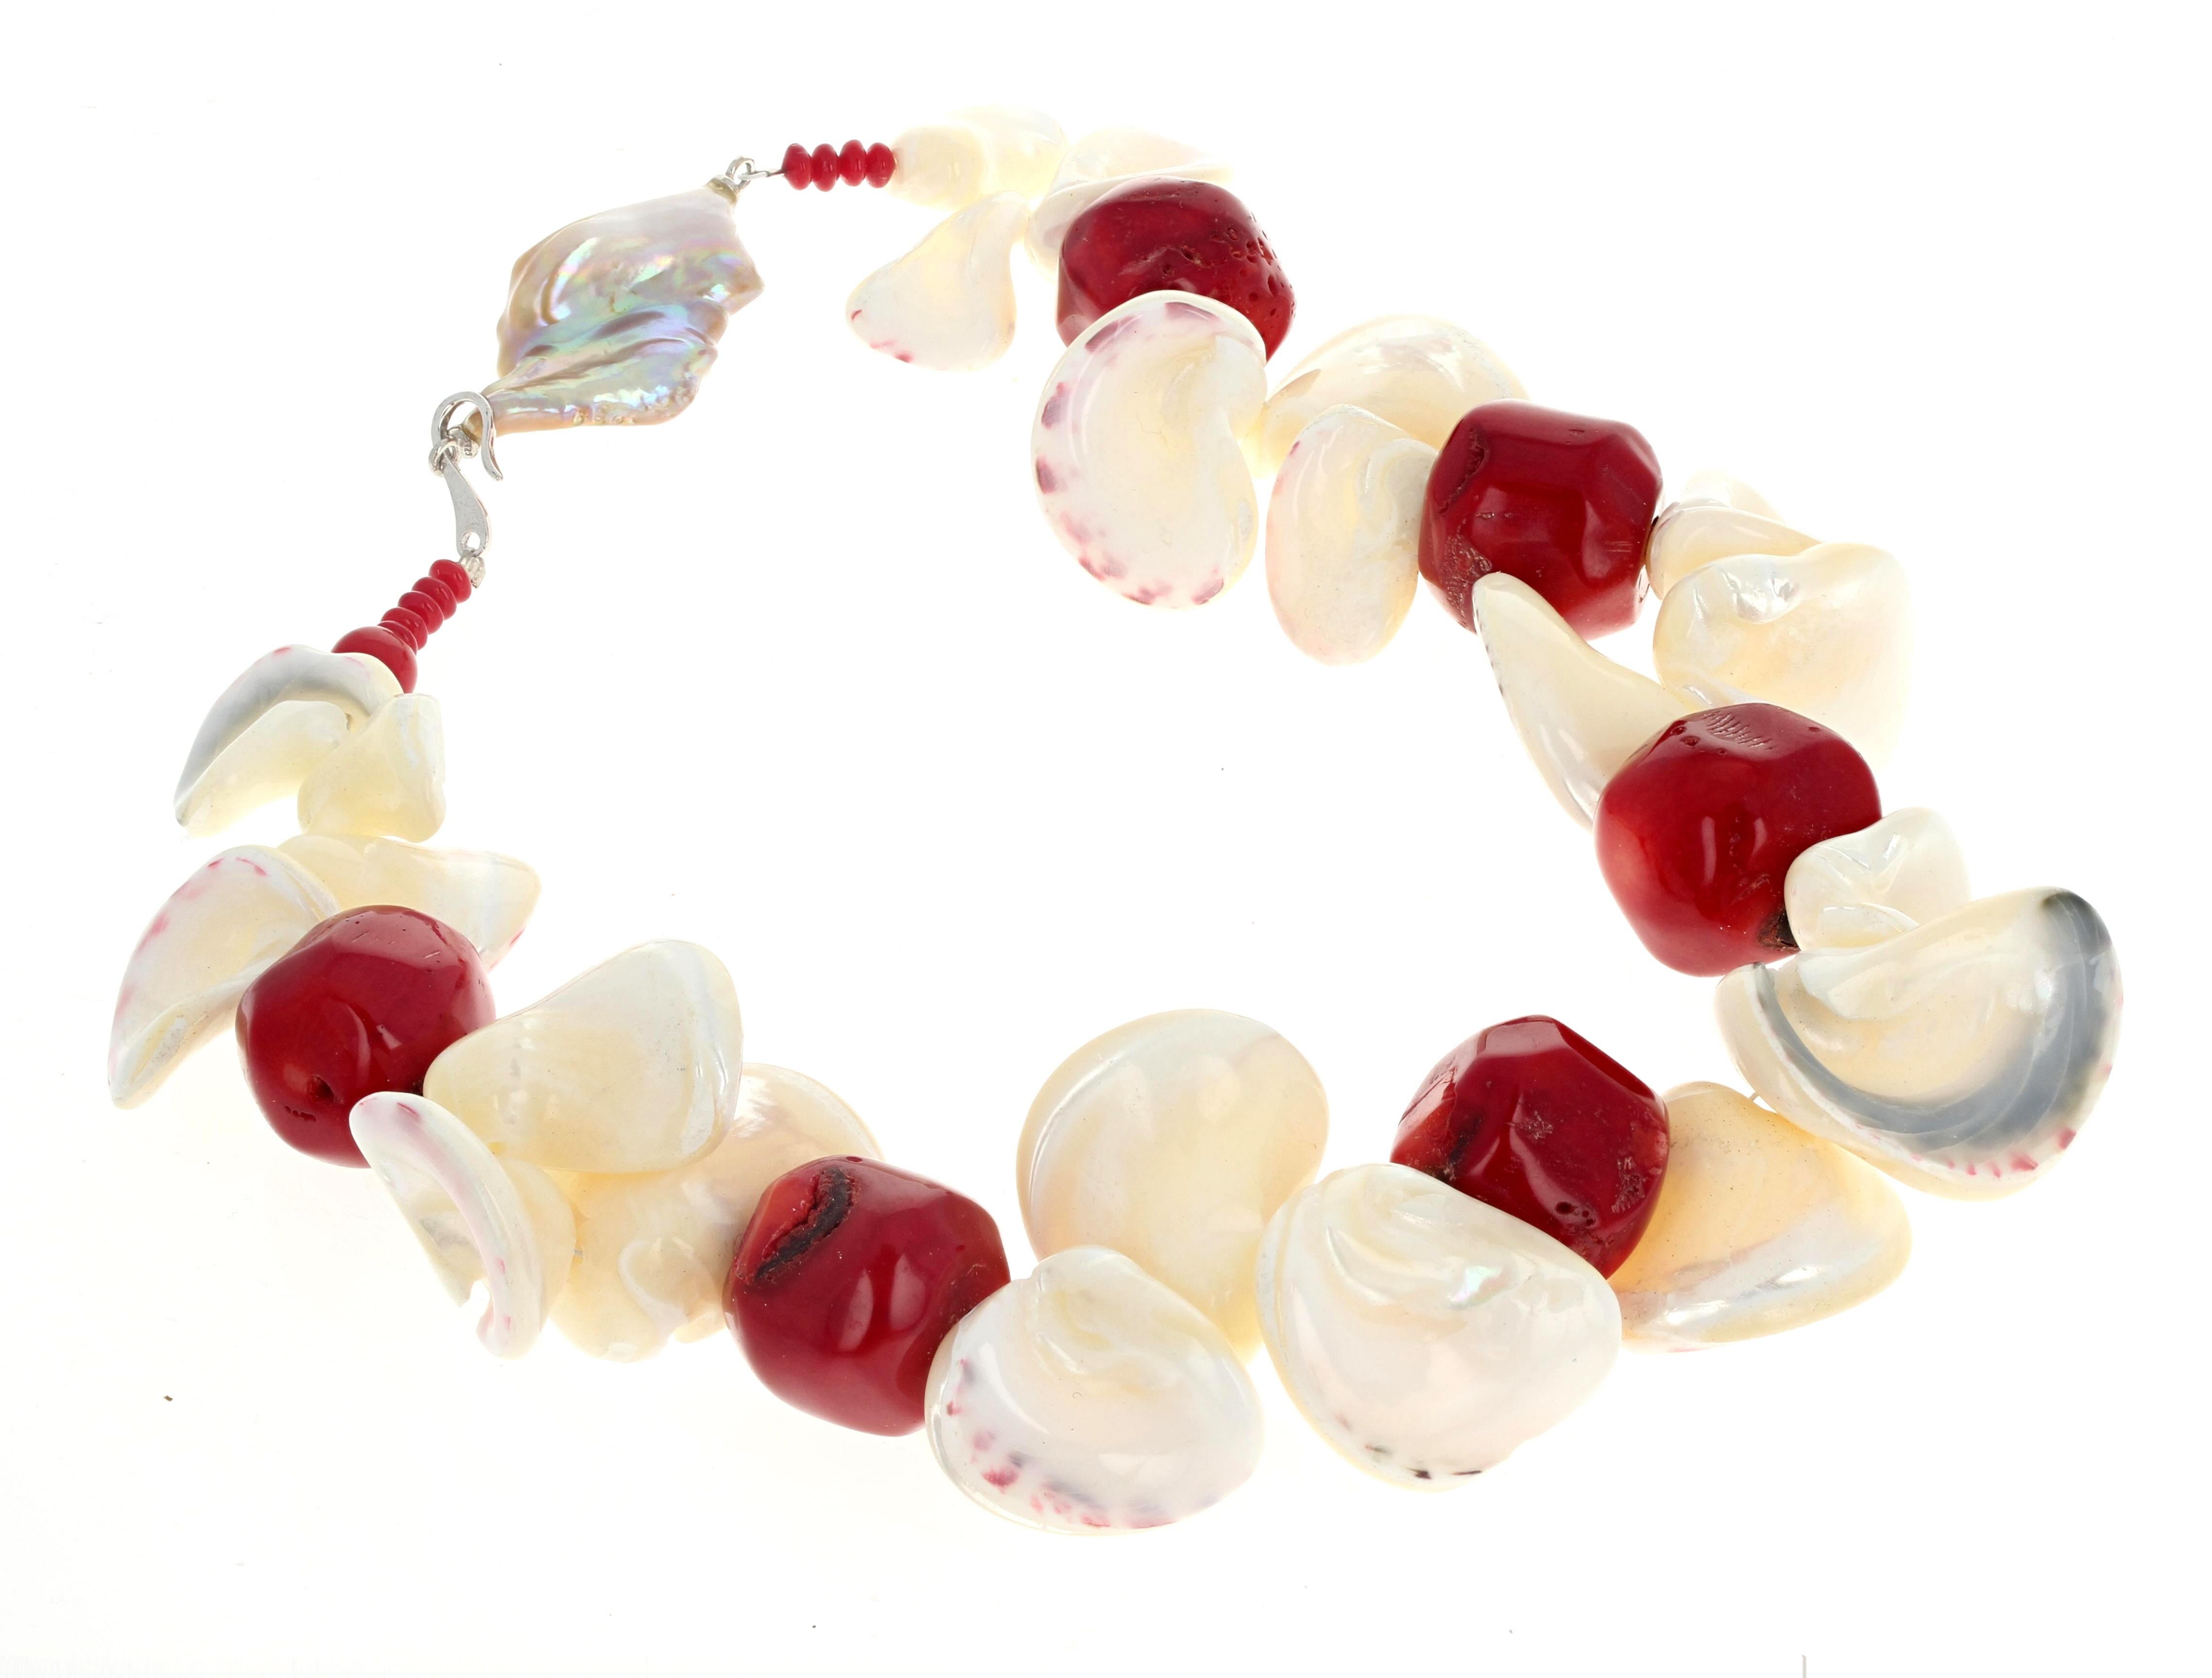 This gorgeous statement necklace of real natural polished Pearl shells and real natural red Coral is 17 inches long.  The big beautiful red coral are approximately 23mm.  The fascinating Pearl shells are all different sizes but the largest is